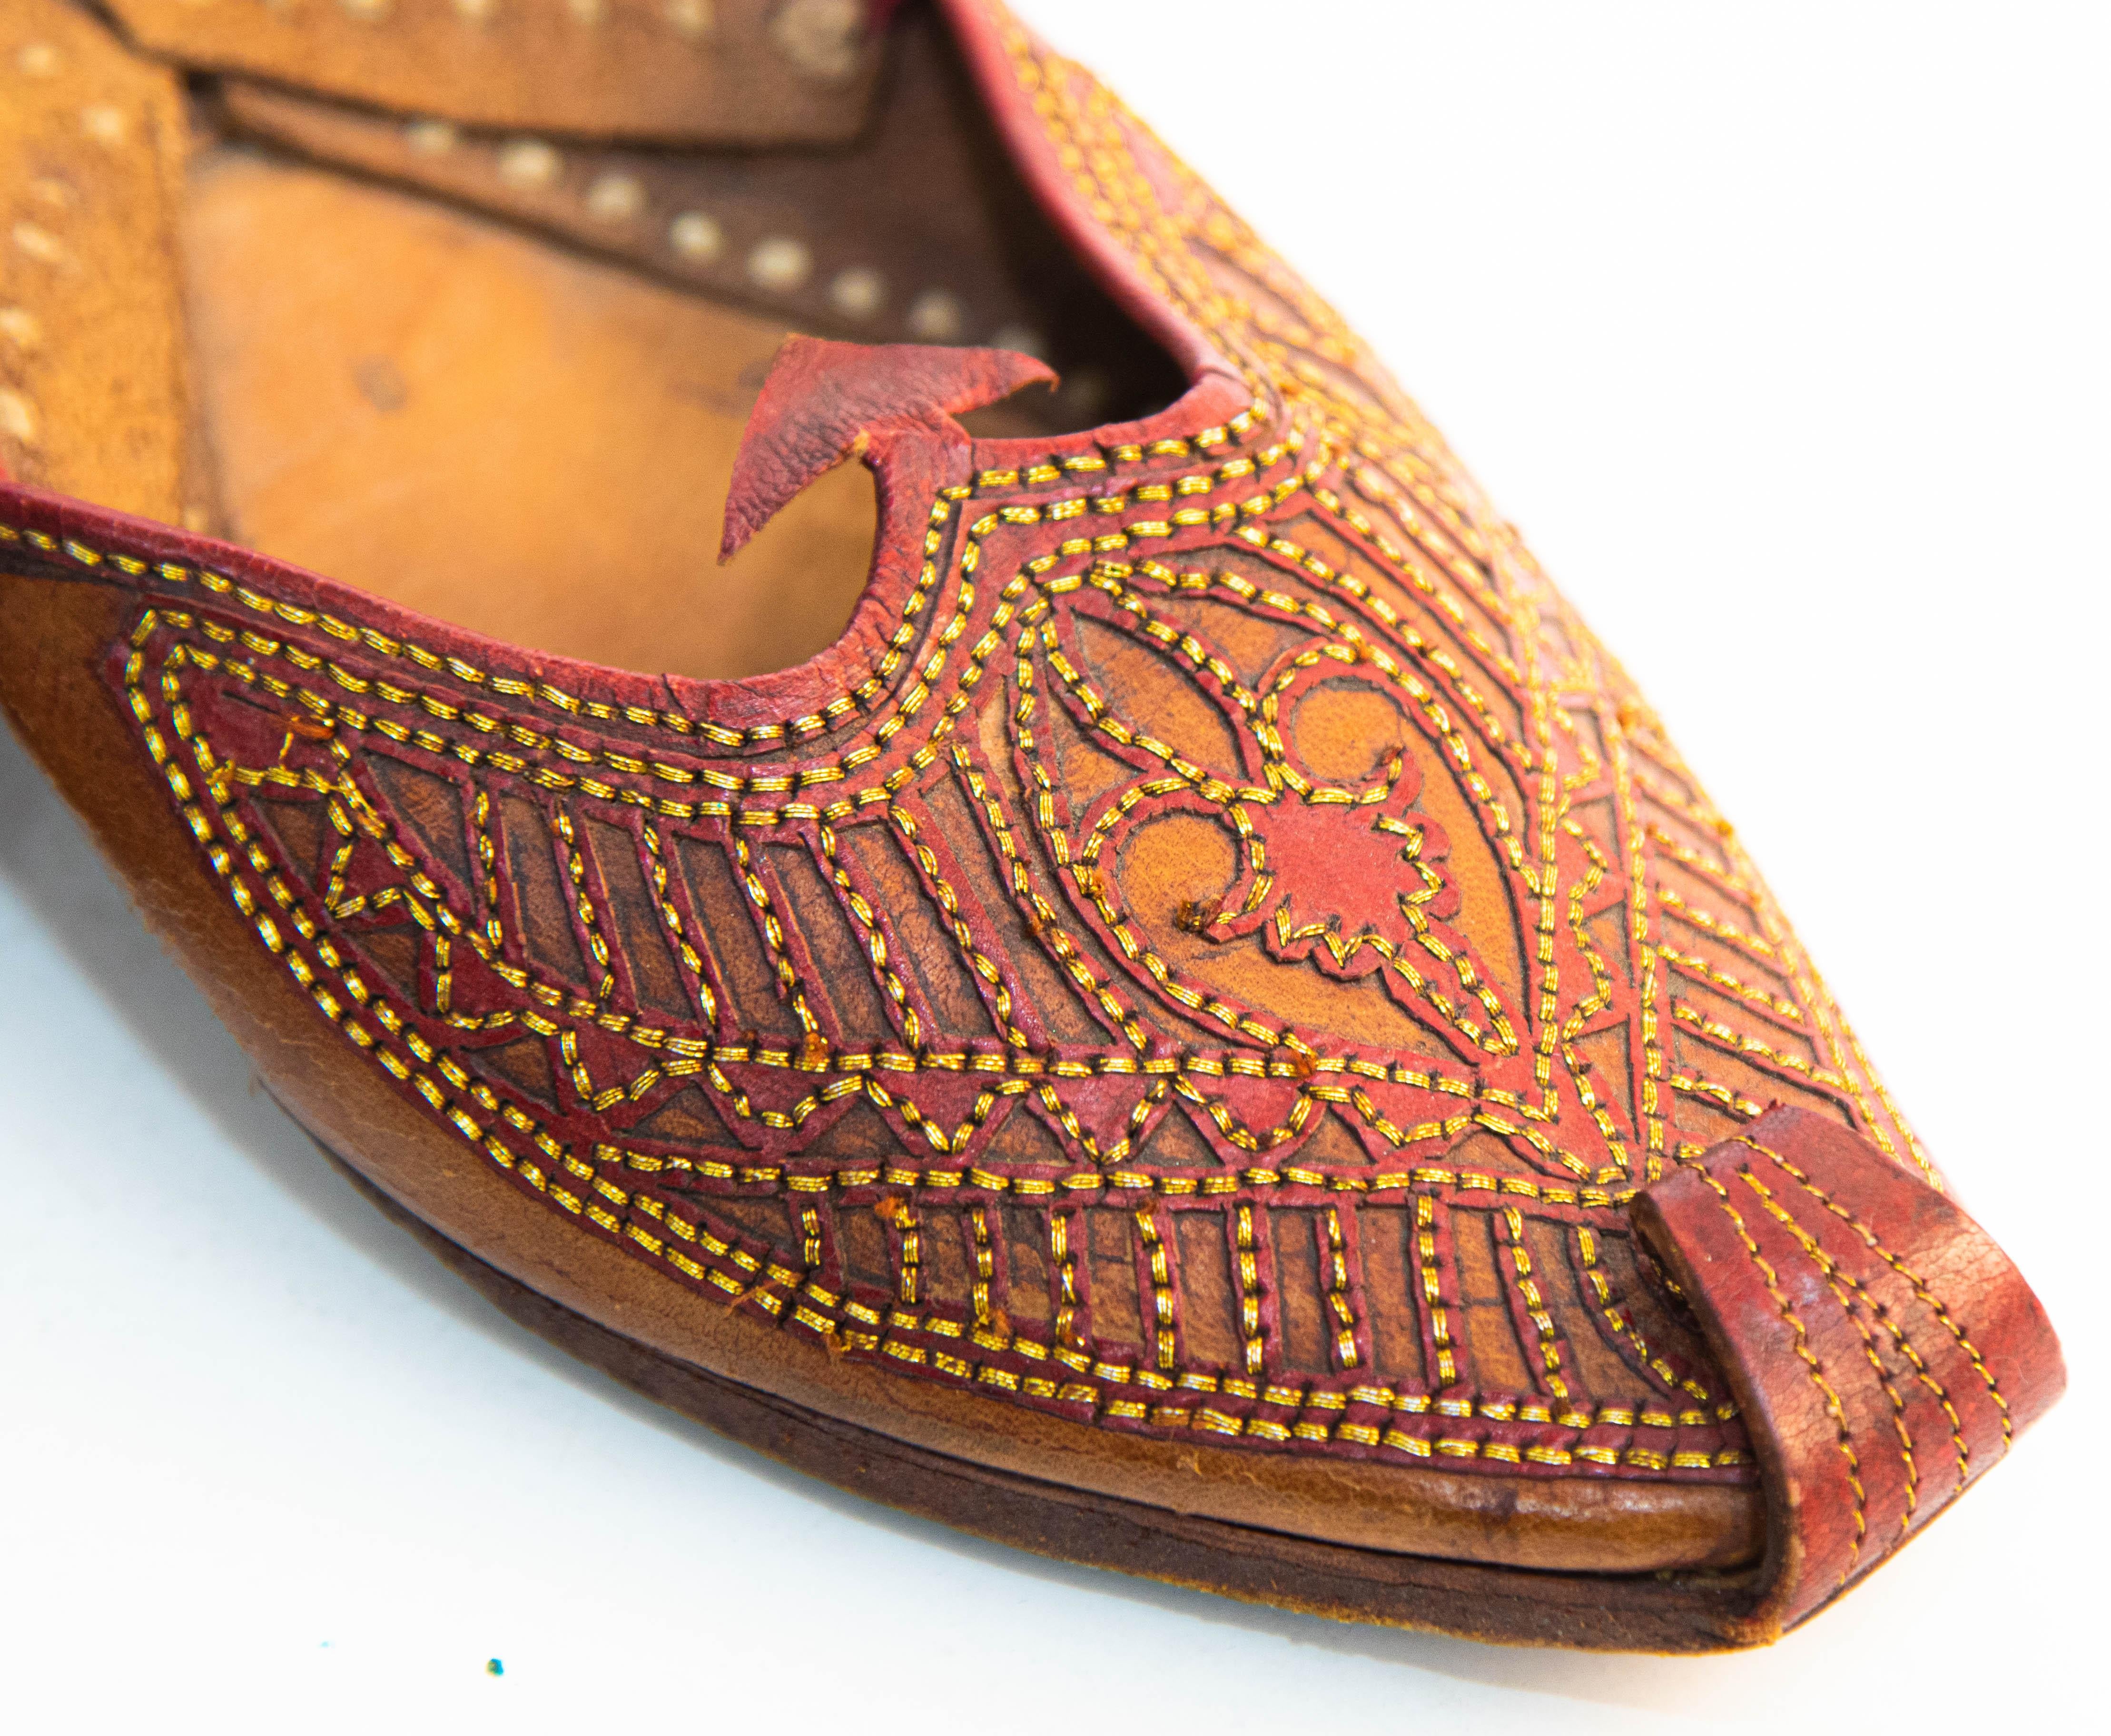 Vintage Arabian Mughal Leather Shoes with Gold Embroidered Curled Toe For Sale 2